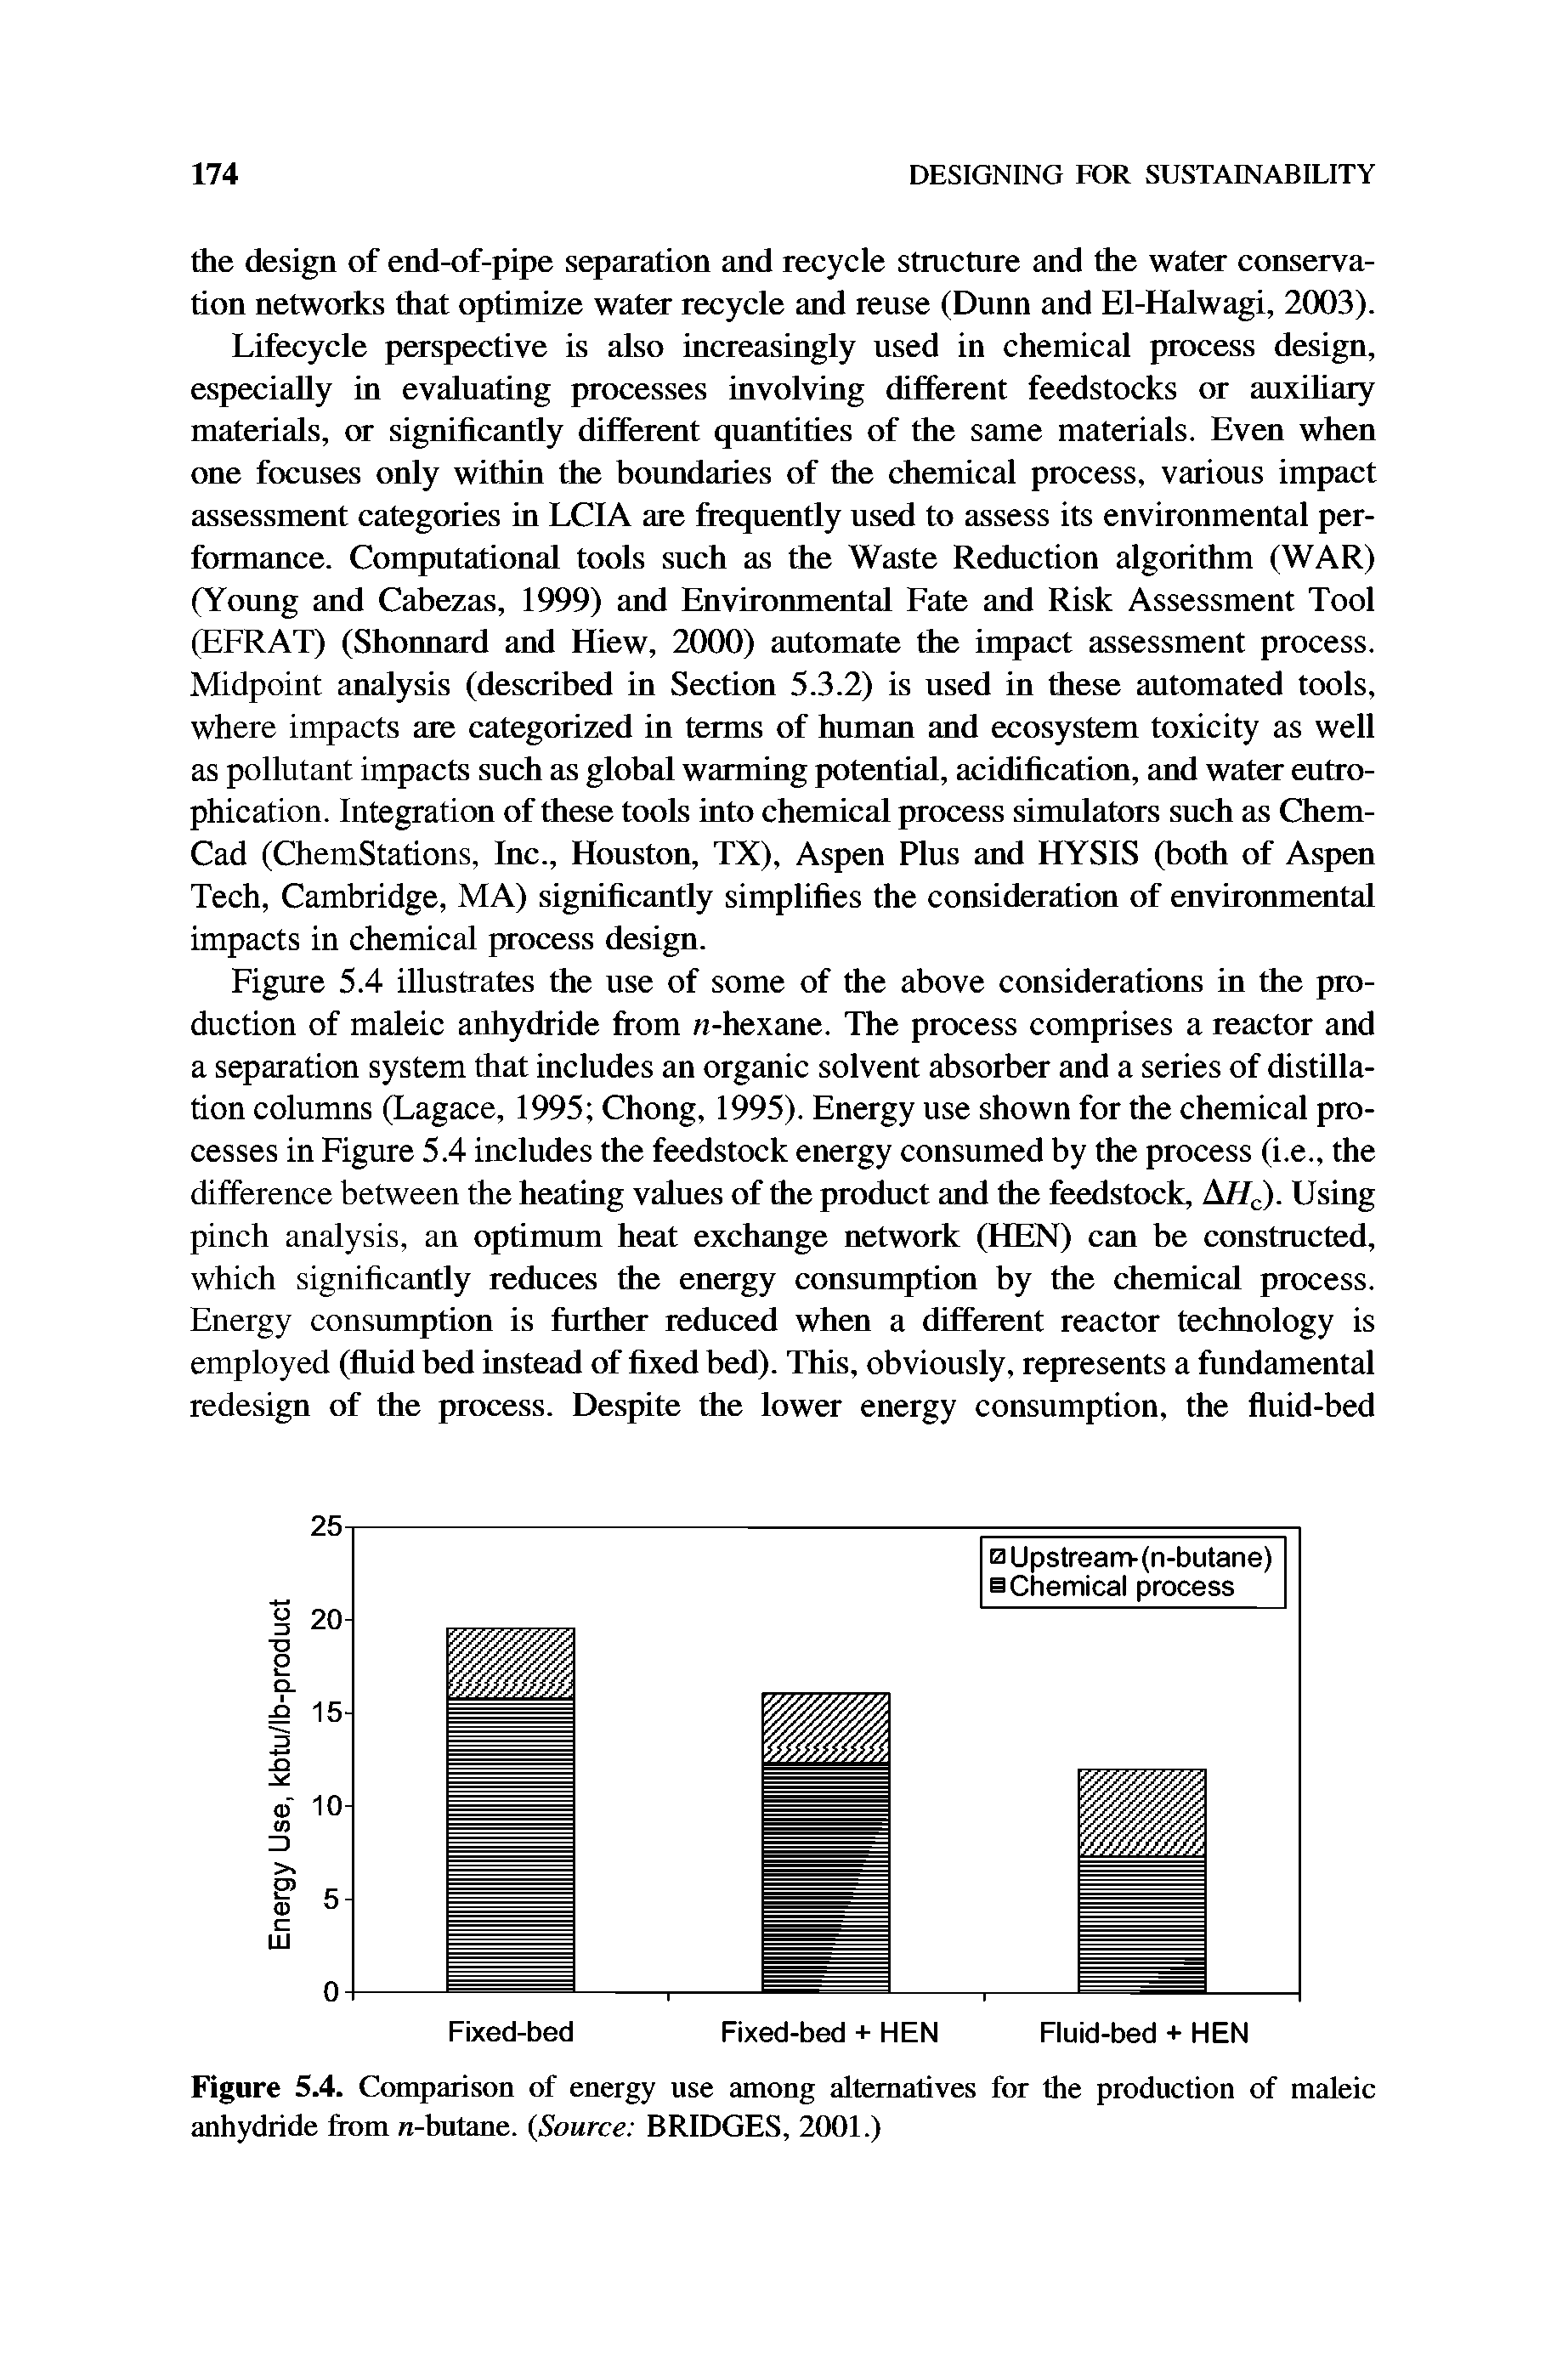 Figure 5.4. Comparison of energy use among alternatives for the production of maleic anhydride from n-butane. (Source BRIDGES, 2001.)...